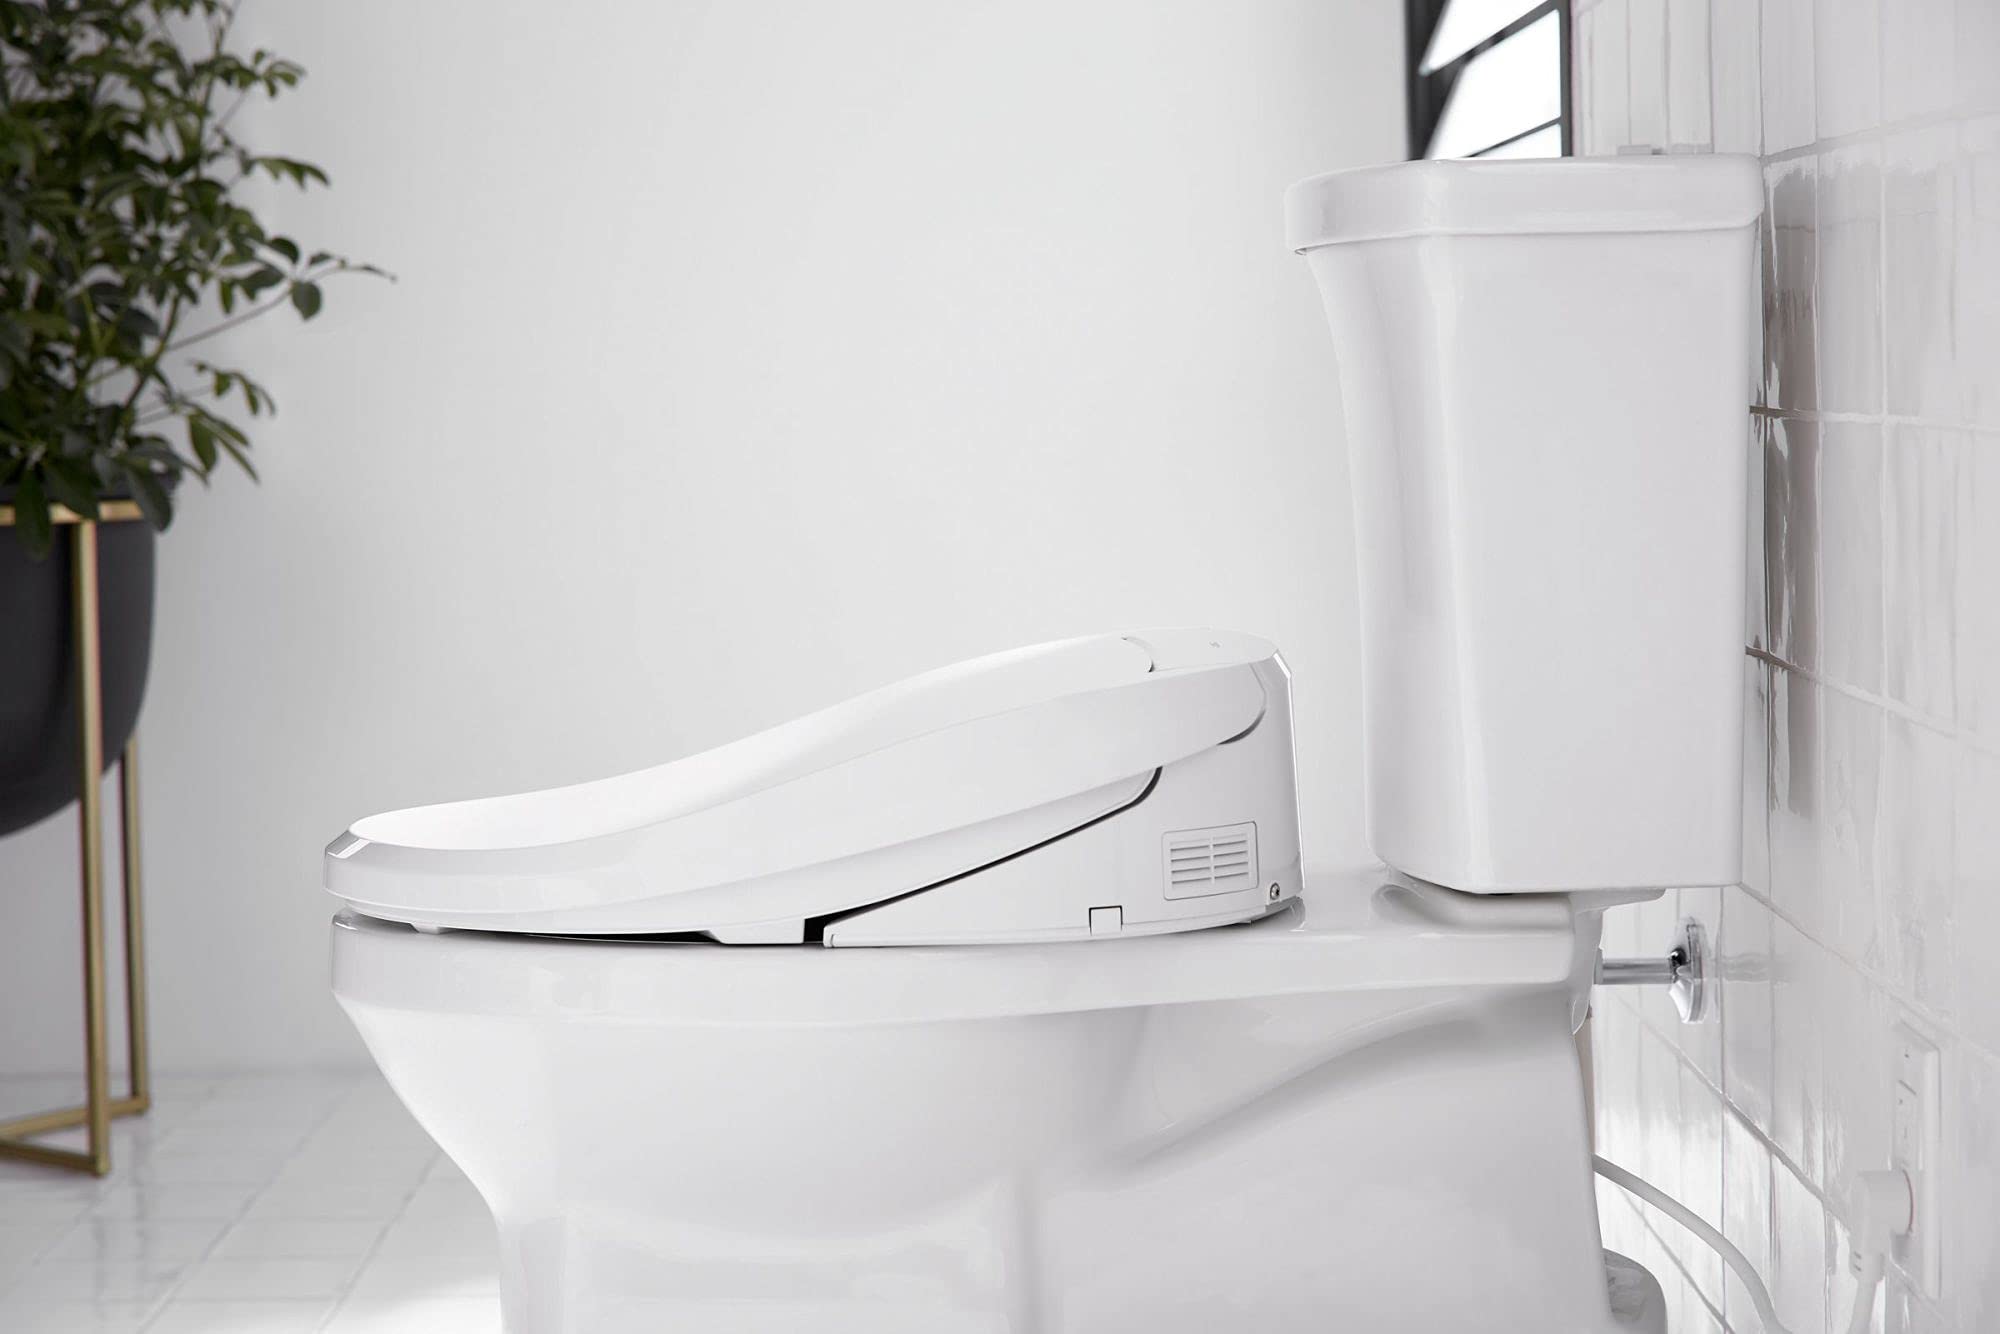 KOHLER K-8298-CR-0 C3 455 Elongated Heated Bidet Toilet Seat, White with Remote Control, Quiet-Close Lid, Automatic Deodorization, Self-Cleaning Wand, Adjustable Water Pressure and Nightlight